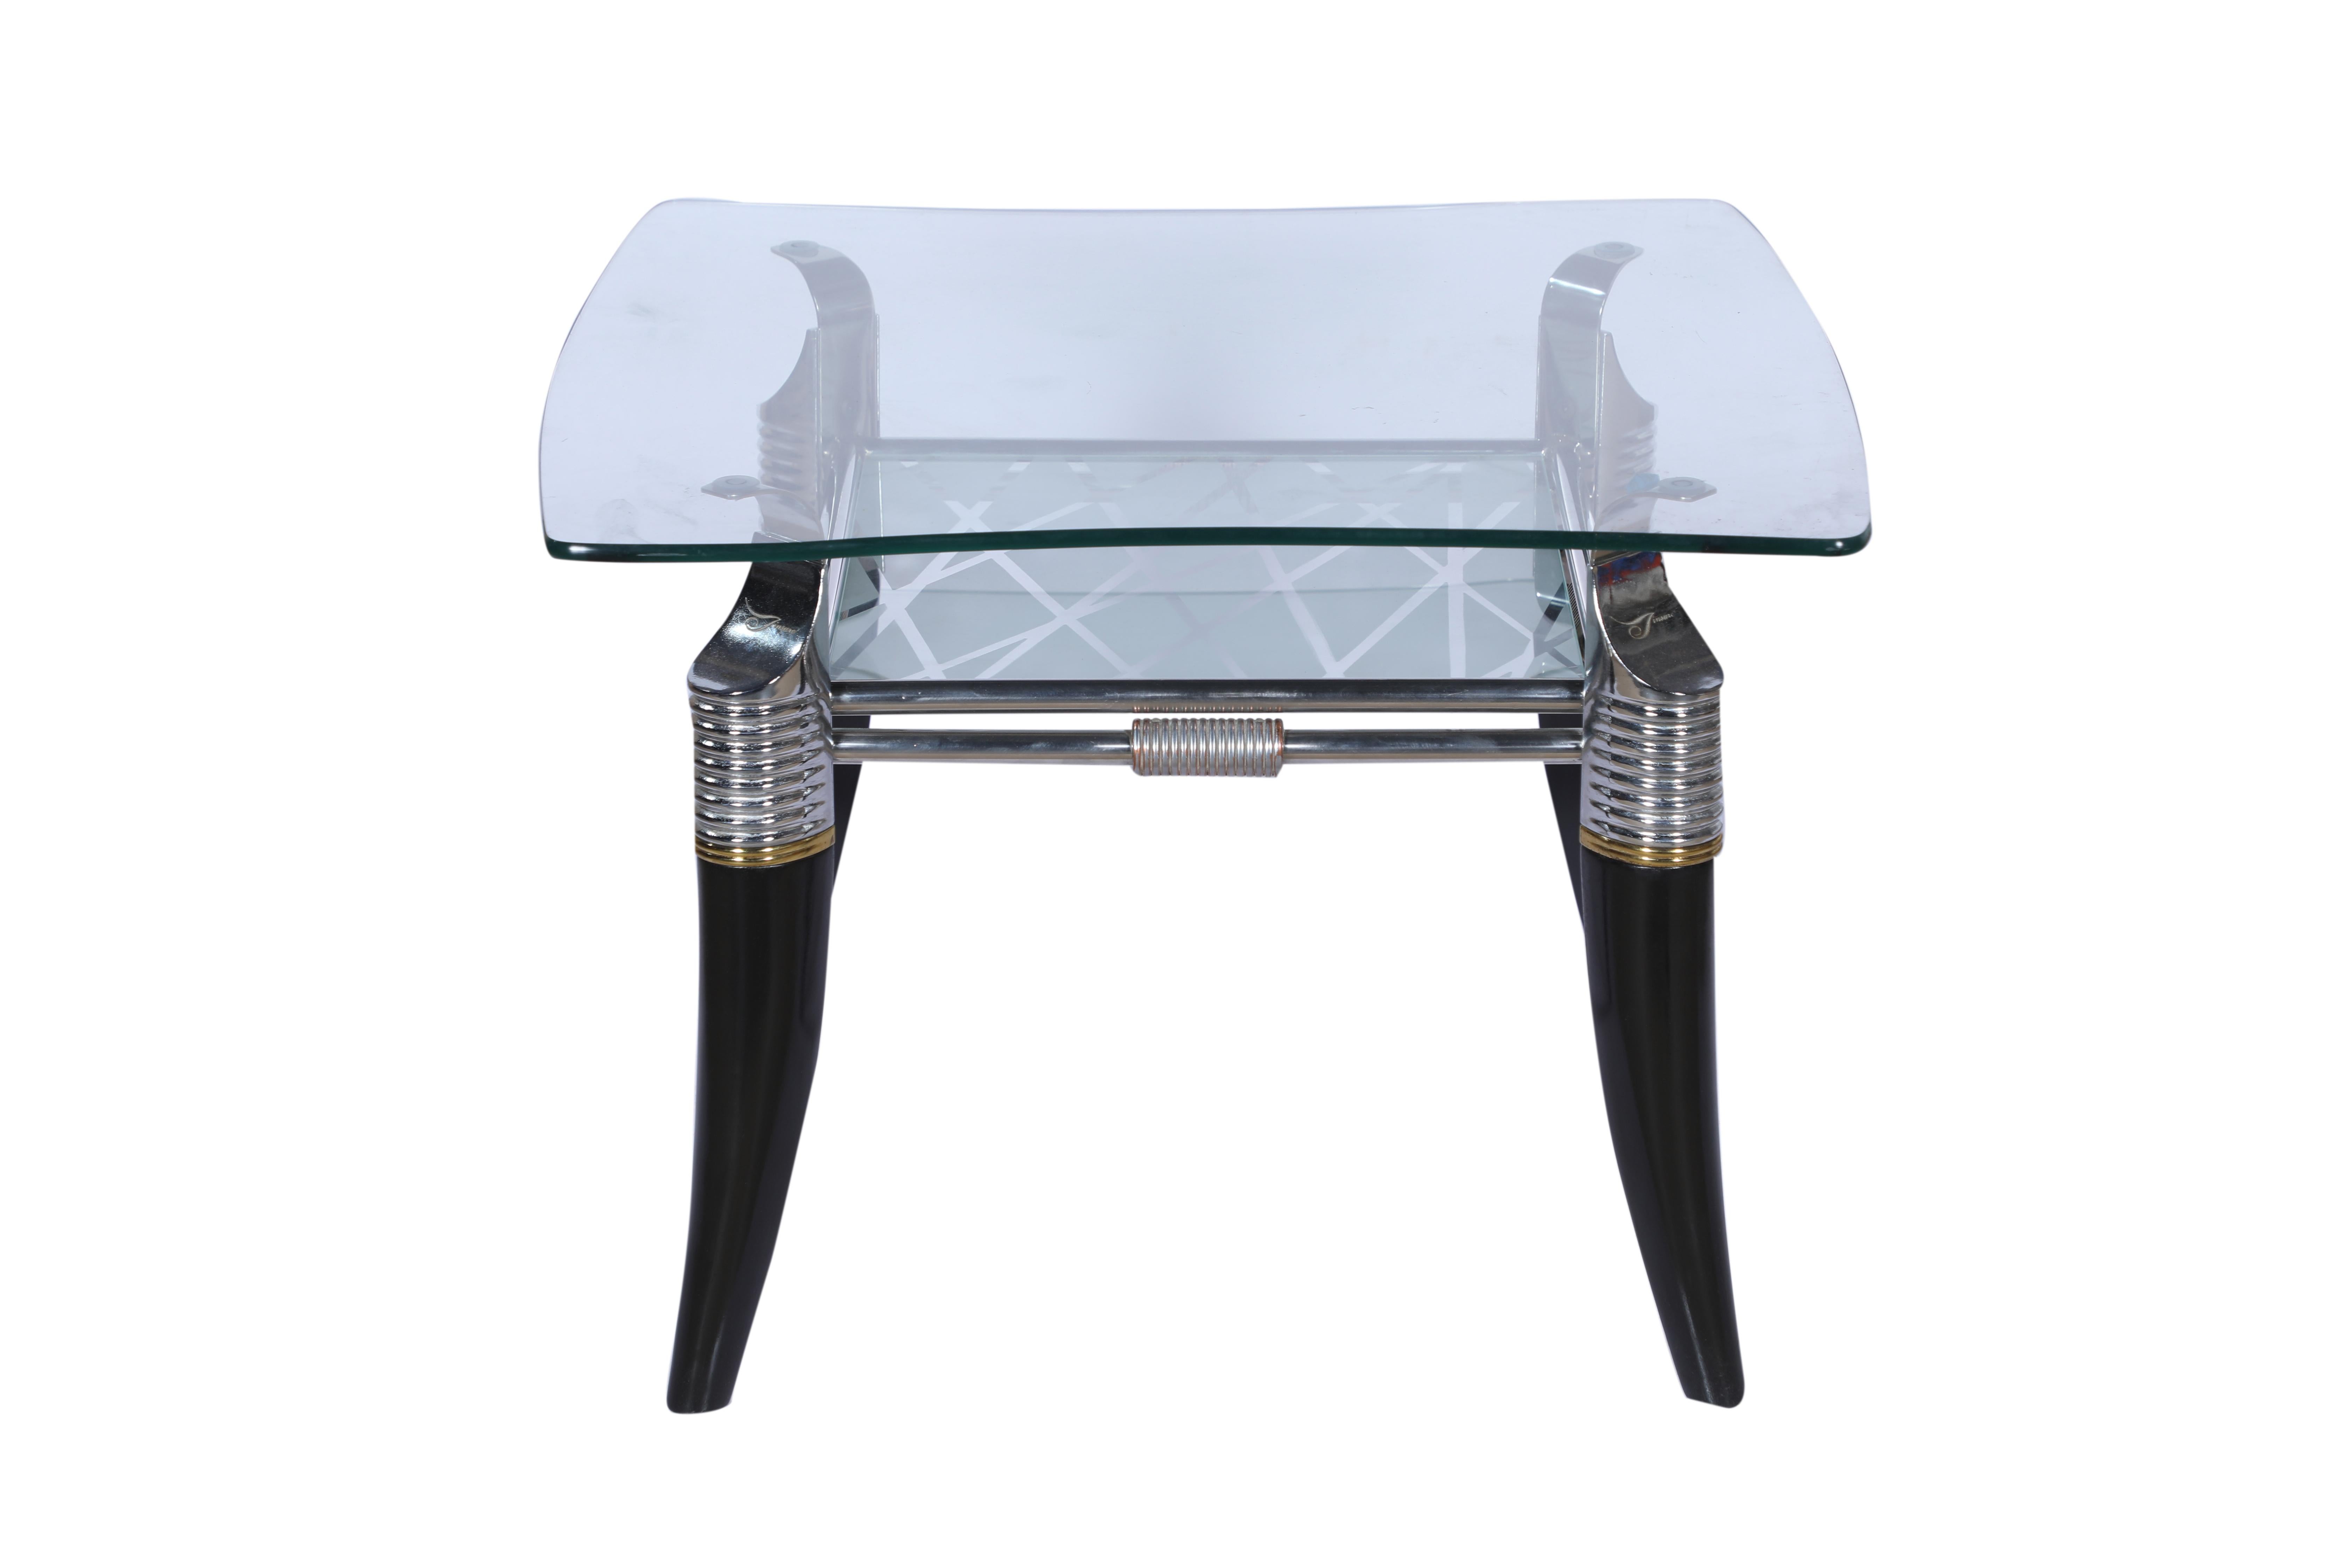 A very unusual Mid-Century Modern coffee or side table. It features ebonized legs in a faux horn motif, chrome detailing with a curved glass top and etched glass second shelf. As of this writing, there is a sister piece measuring 45 x 26. Together